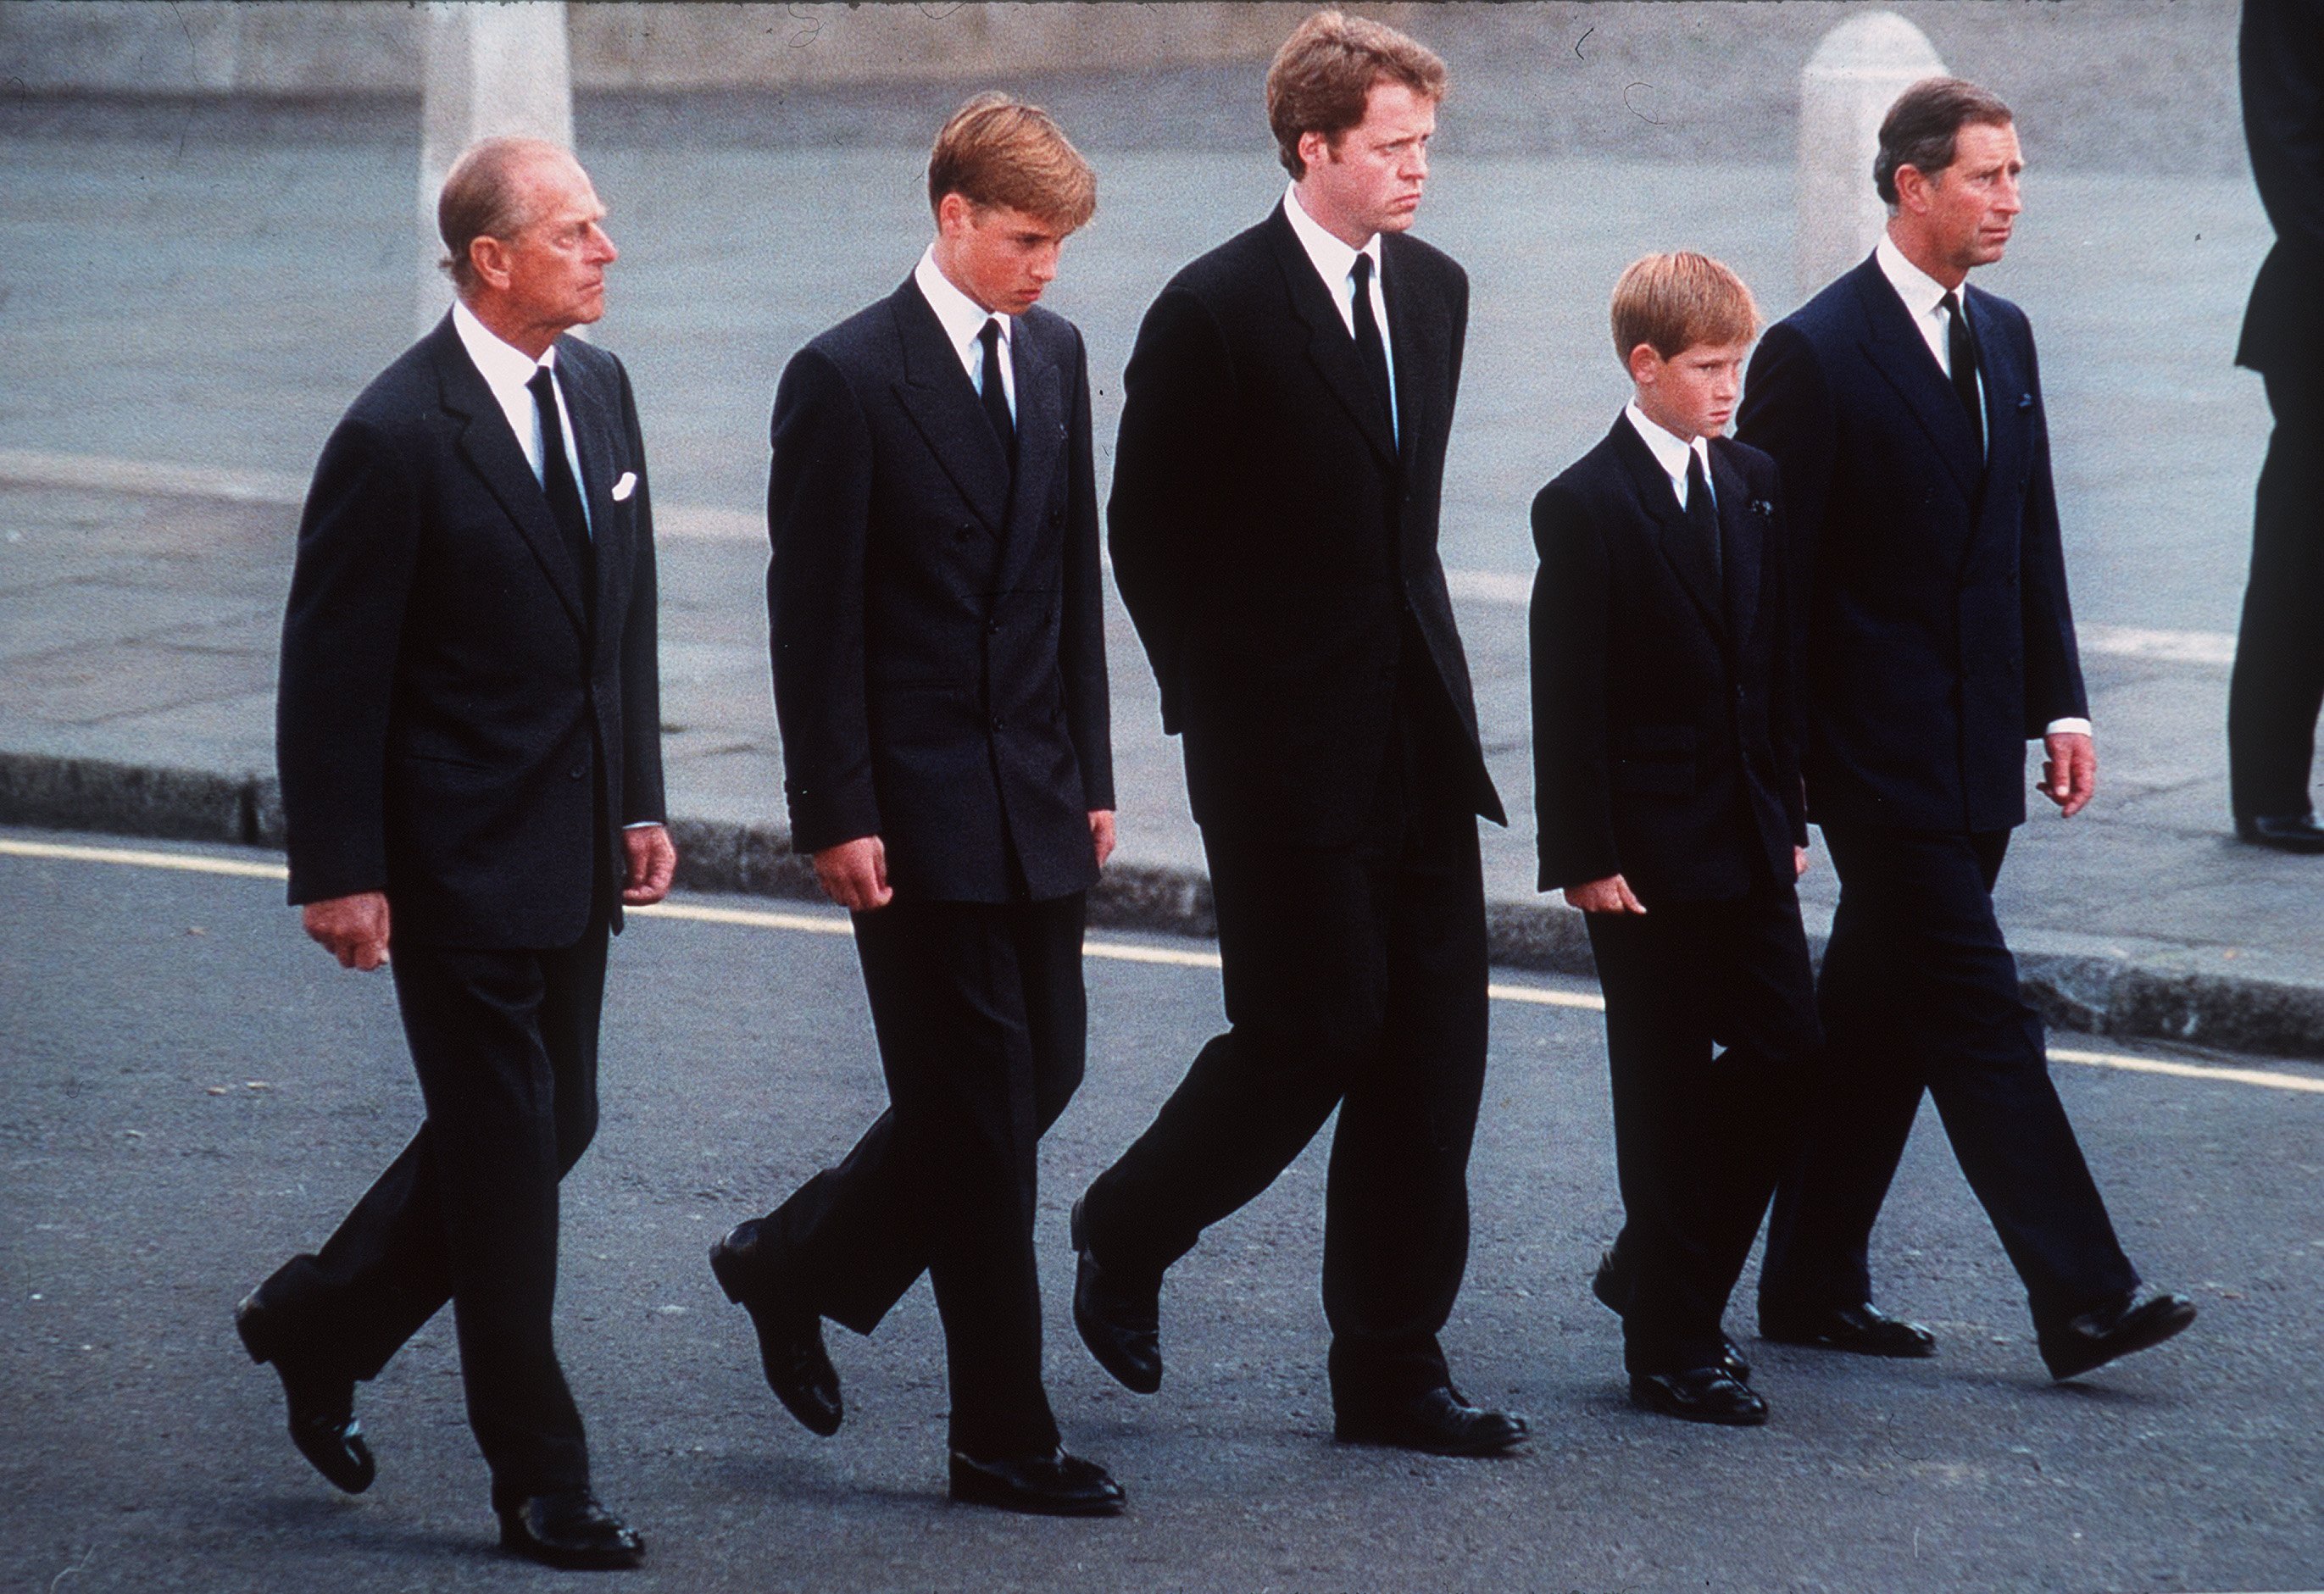 Prince Harry, Prince William, Prince Phillip, and Earl Spencer at the funeral of Princess Diana in London 1997. | Source: Getty Images 